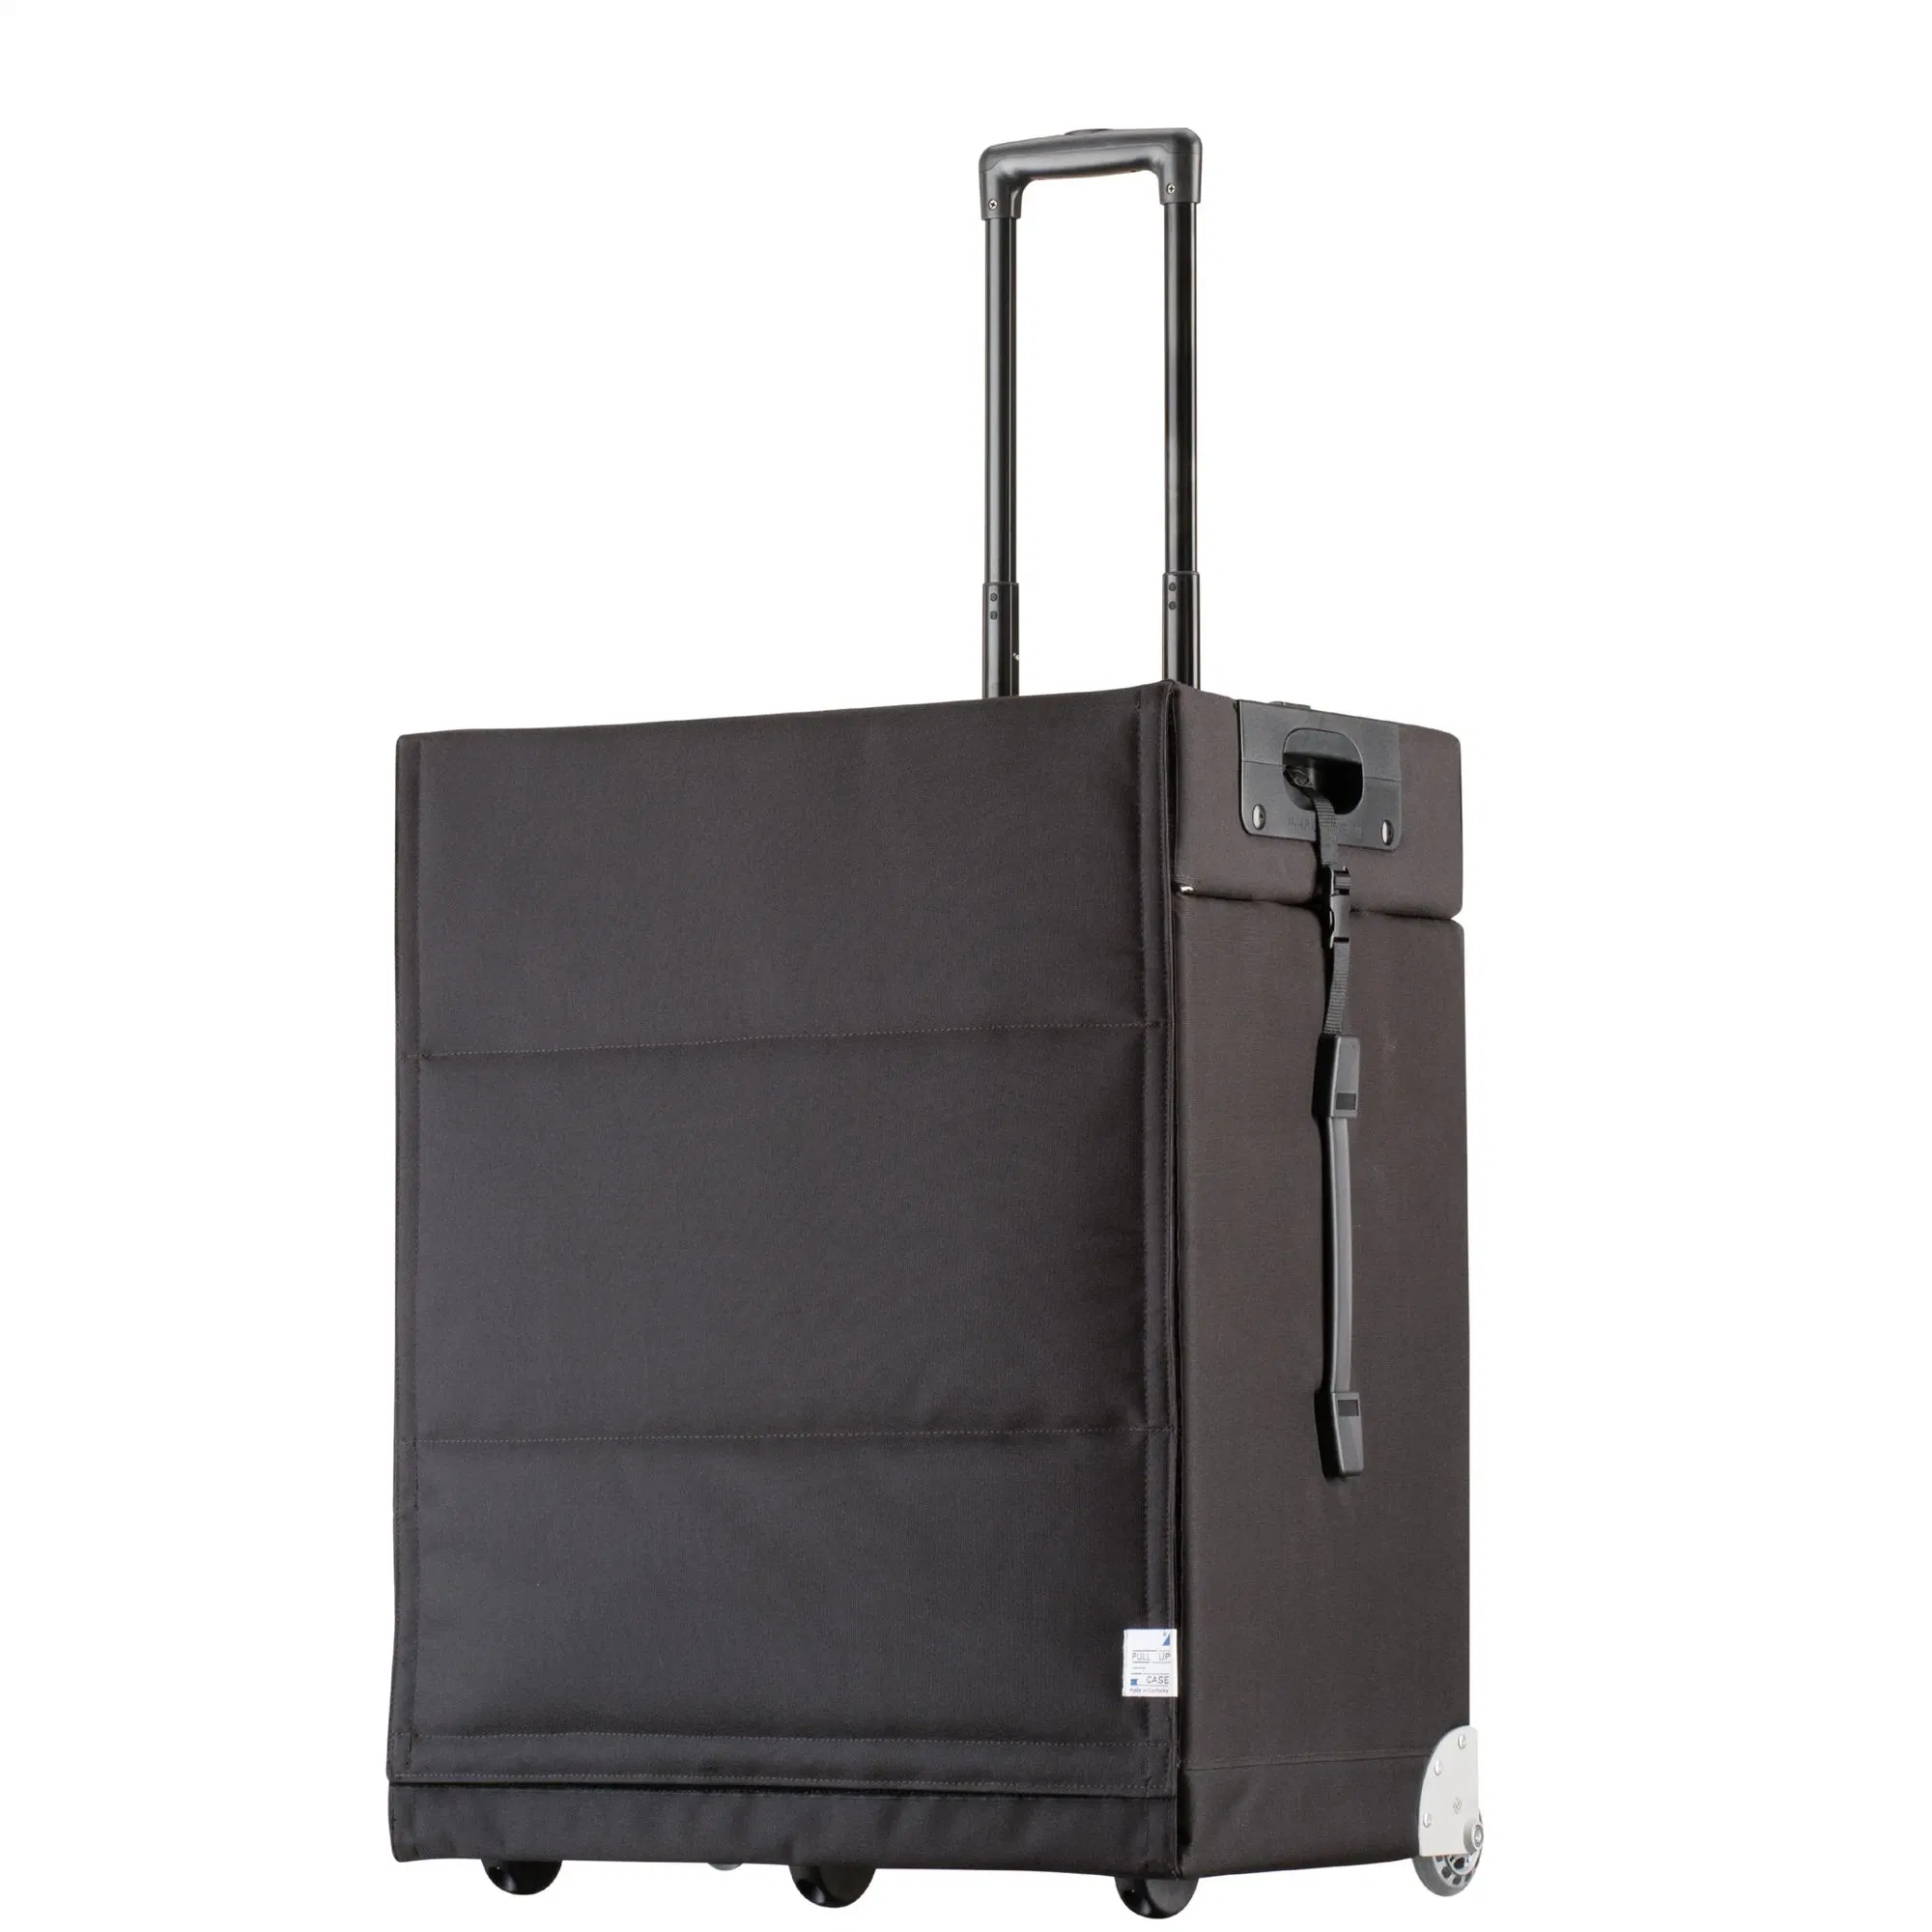 Pull-up-Case AV-400 Sample Avantgarde Luggage Bag Hot Fashion Easy Taking Glasses Bags Sample Bag 2 Wheels Display Cases Made in Germany Best Way for Business